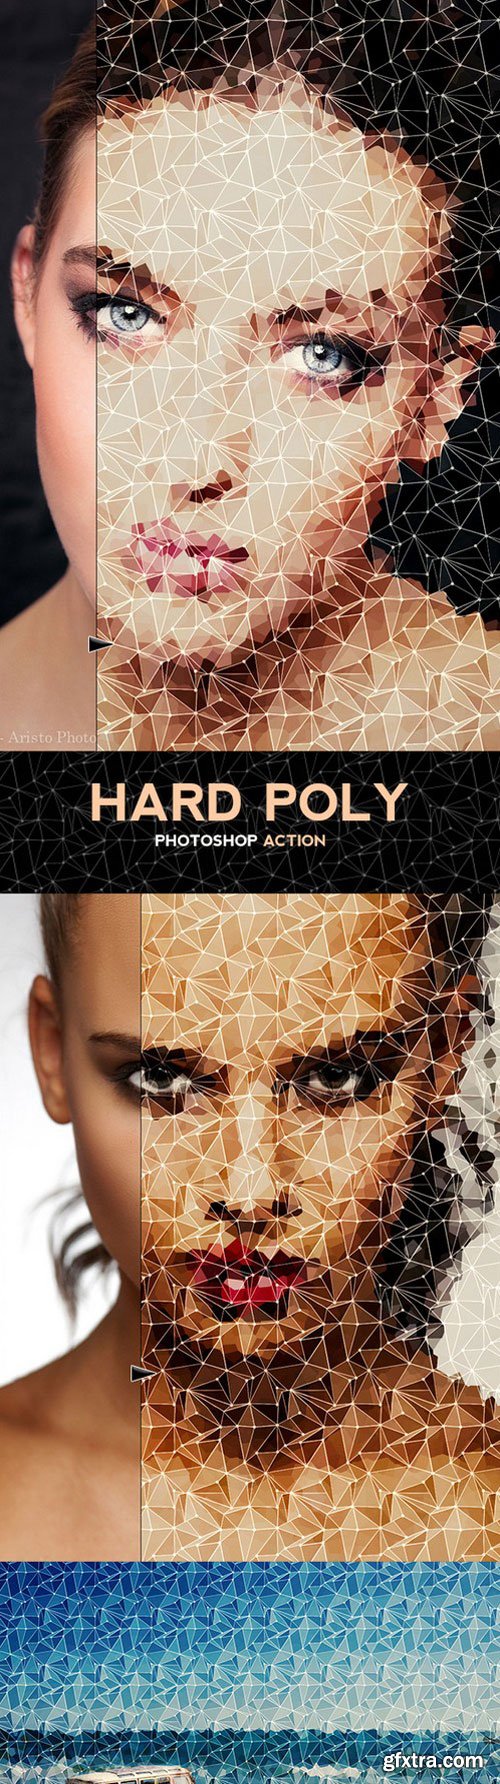 Graphicriver - 11775998 Hard Poly PS Action